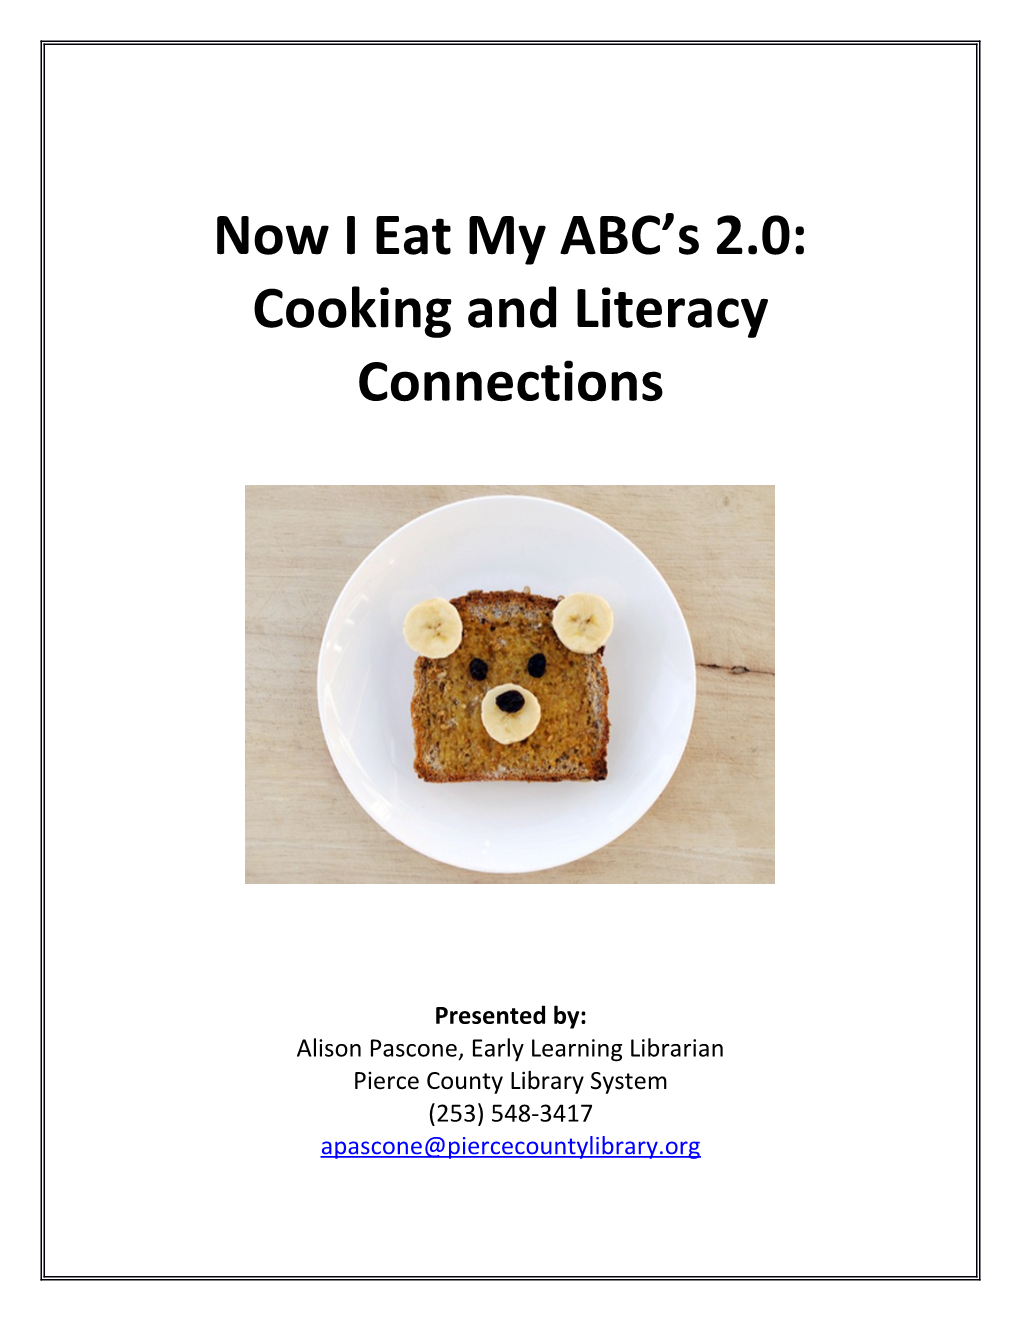 Now I Eat My ABC S 2.0: Cooking and Literacy Connections